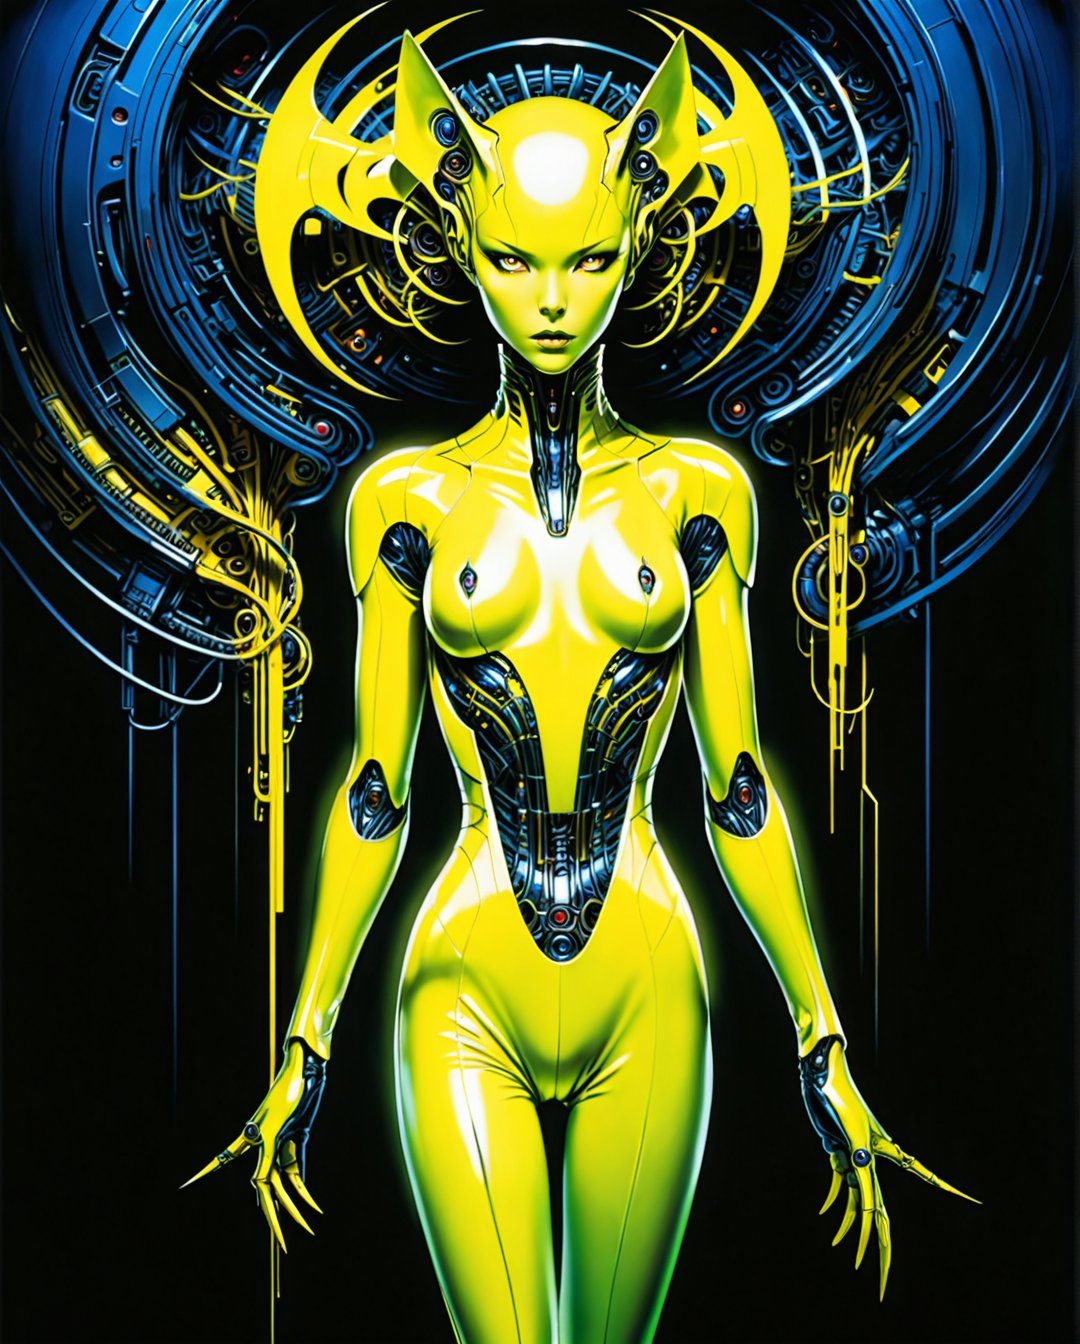 Art style by amano yoshitaka, In a neon-lit cyberpunk space setting, a figure emerges clad in a sleek yellow jumpsuit, designed with a distinct art style reminiscent of Yoshiaki Kawajiri. The scene is portrayed in a vivid and elaborate digital painting, showcasing sharp edges and dynamic colors. The jumpsuit gleams with metallic sheen, accentuating the mysterious allure of the character. Every detail, from the sleek contours to the intricate patterns, contributes to the image's captivating and high-quality execution, drawing viewers into a futuristic world of intrigue and sophistication., 1990s (style), in the style of nicola samori, detailed 8k horror artwork,
art by Tsutomu Nihei gerald-brom